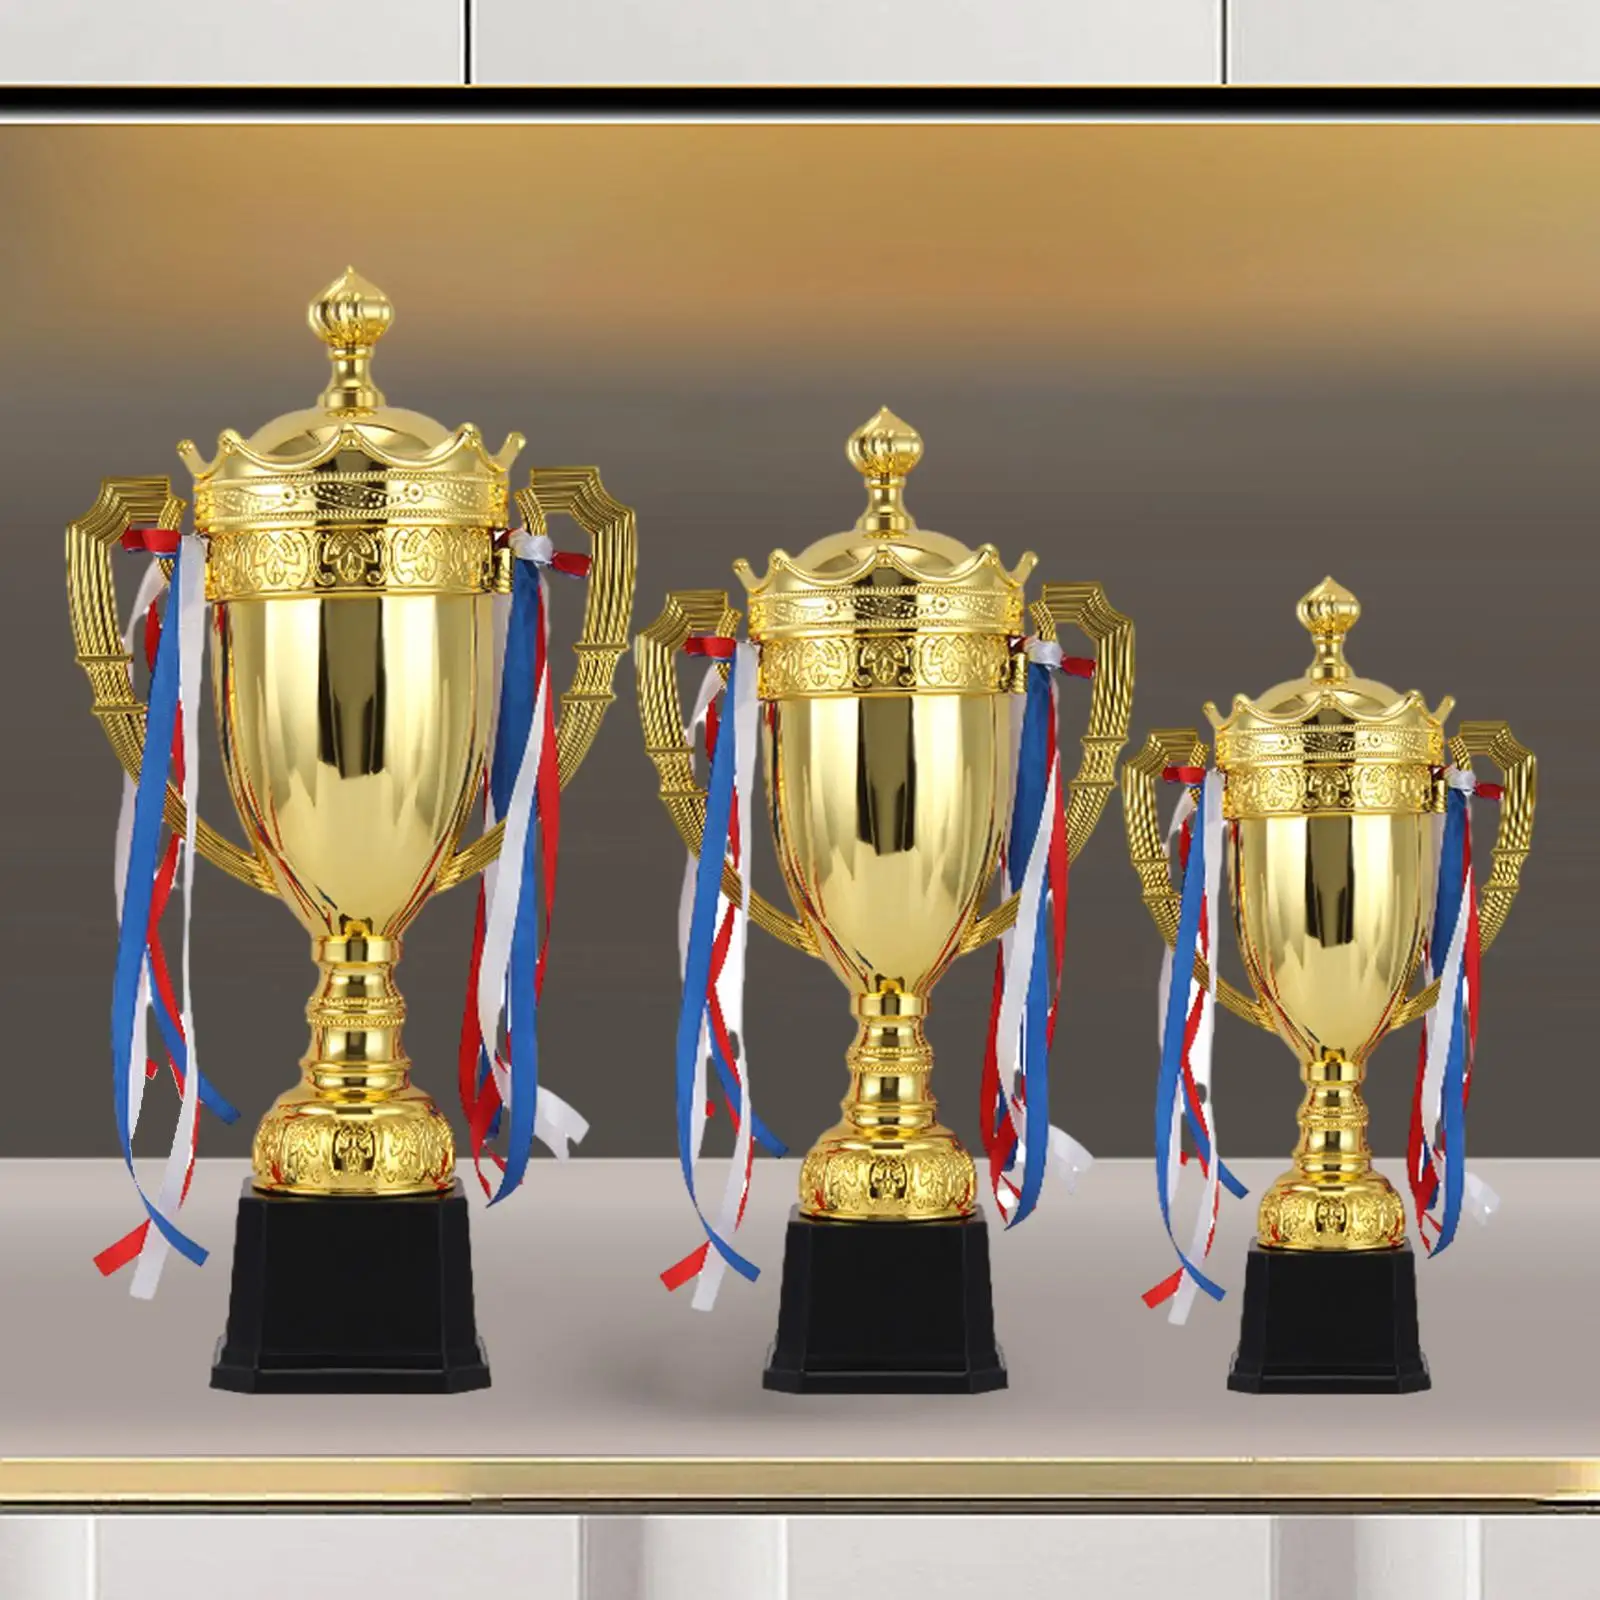 Award Trophy Cup Mini Trophy for Party Favors Sports Championships